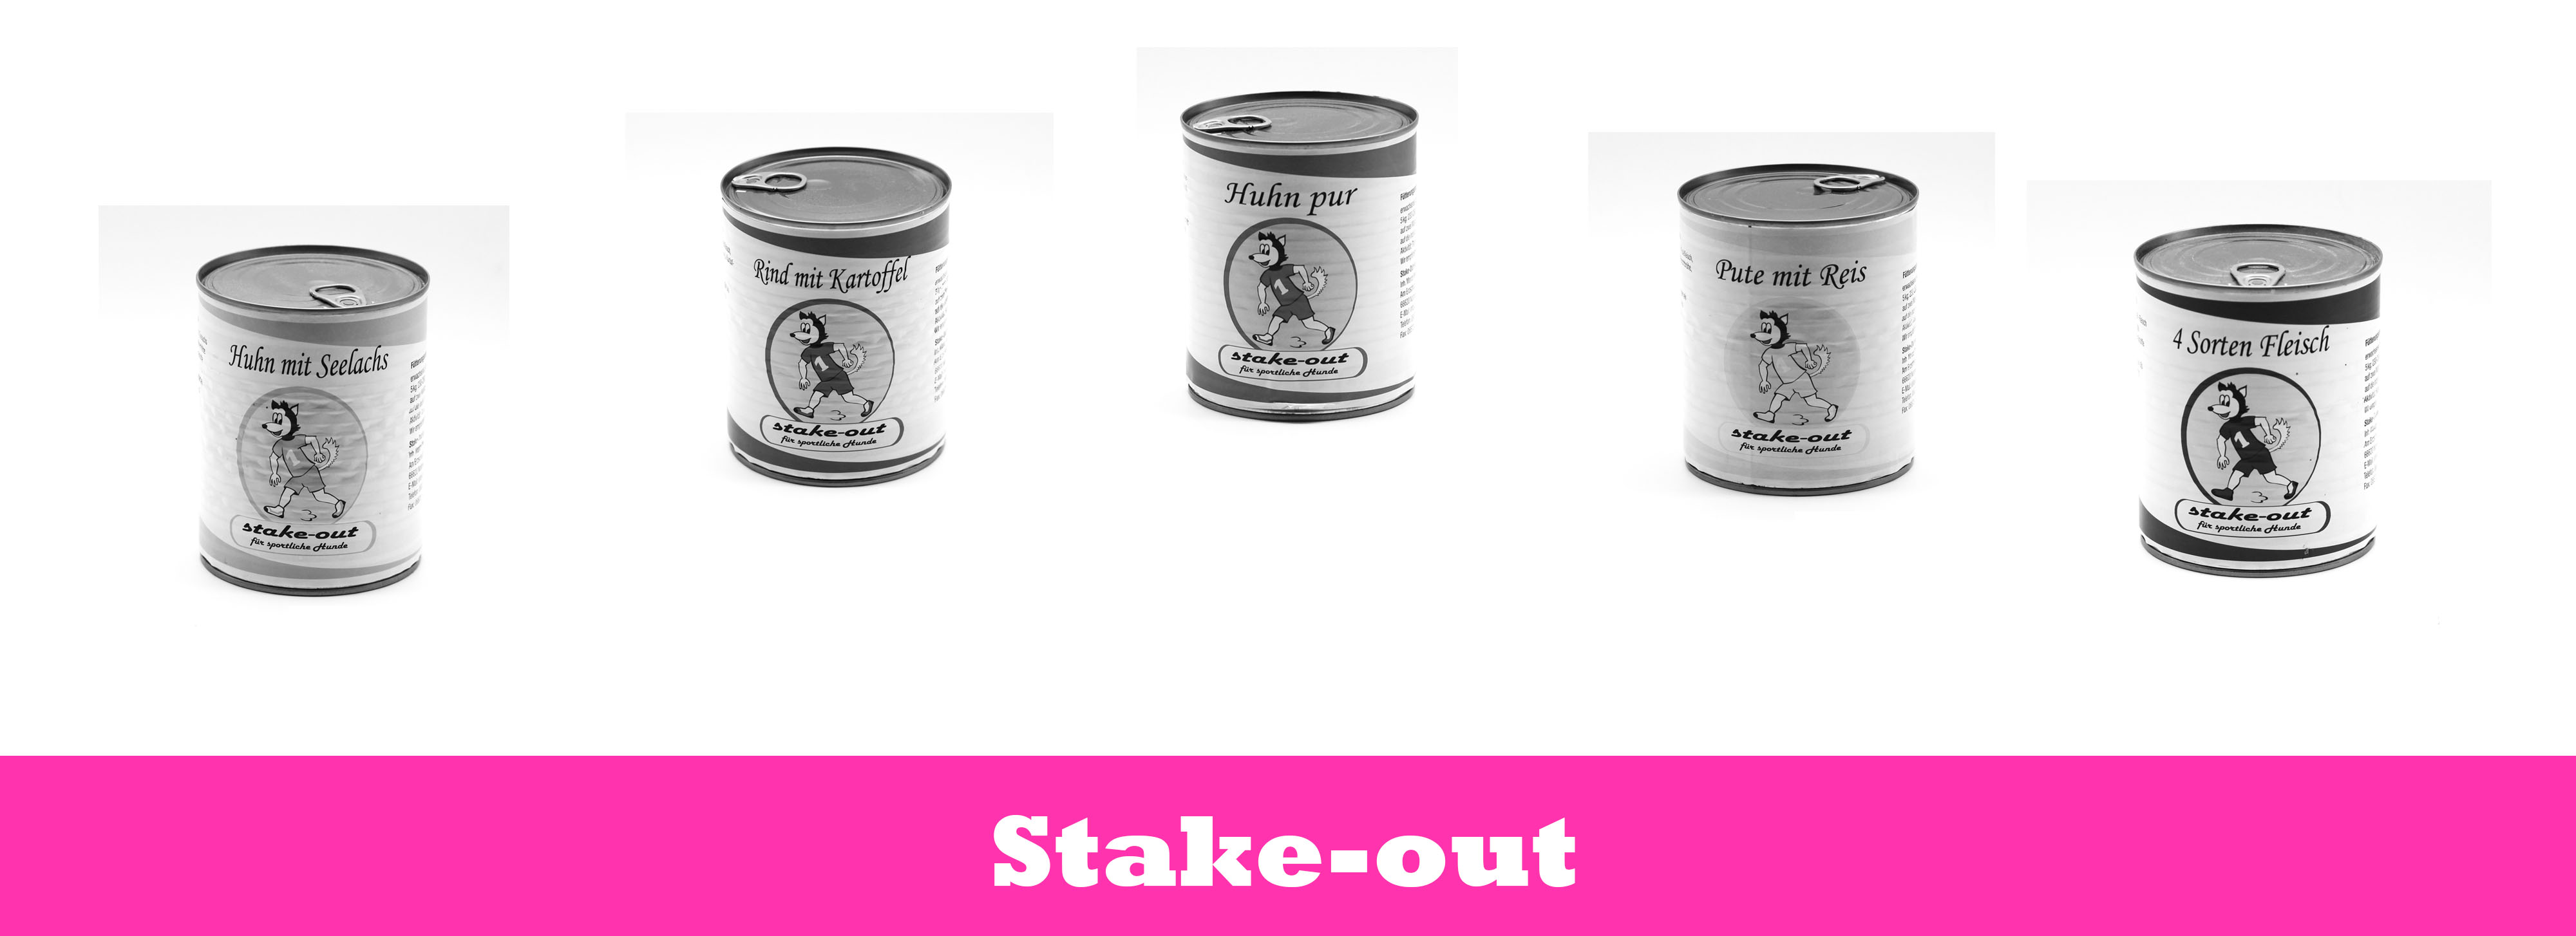 Stake-out Hundefutter